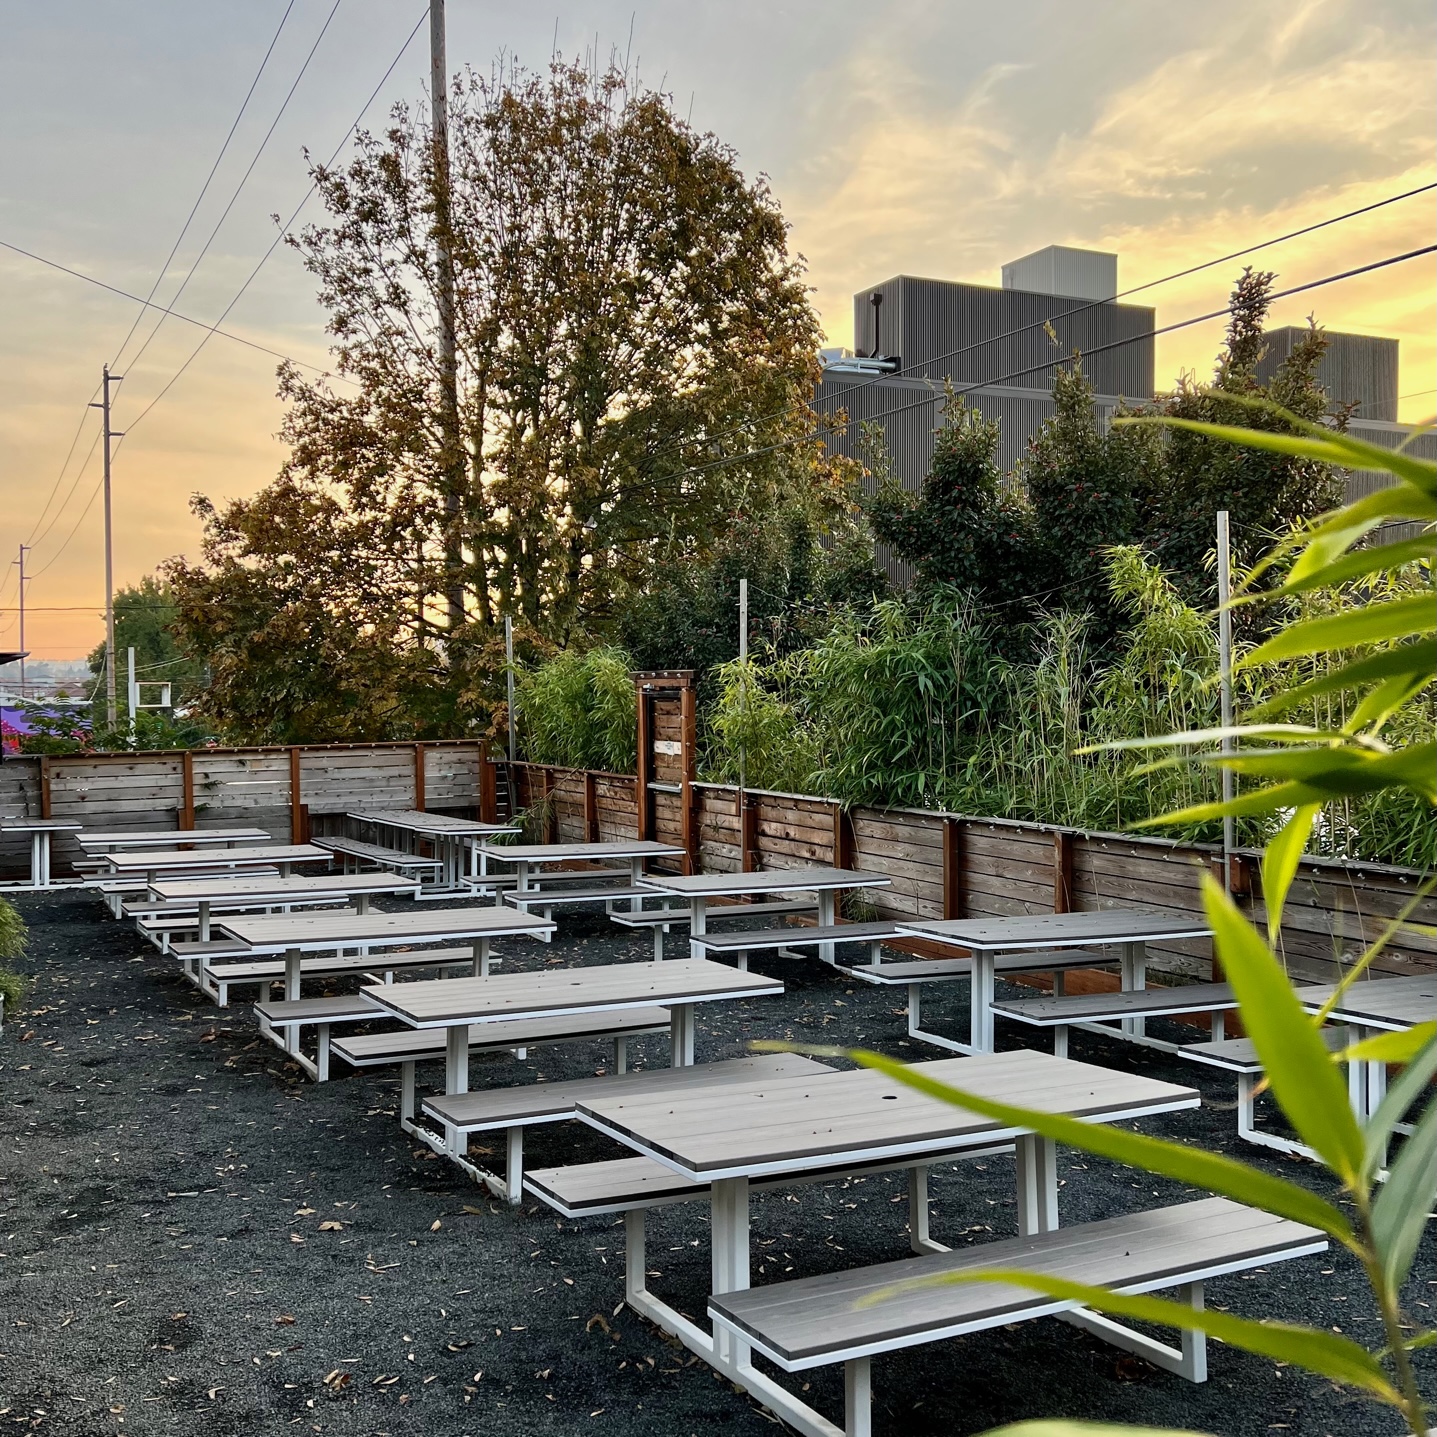 The outdoor seating area at Ecliptic Brewing's Moon Room location in Southeast Portland.